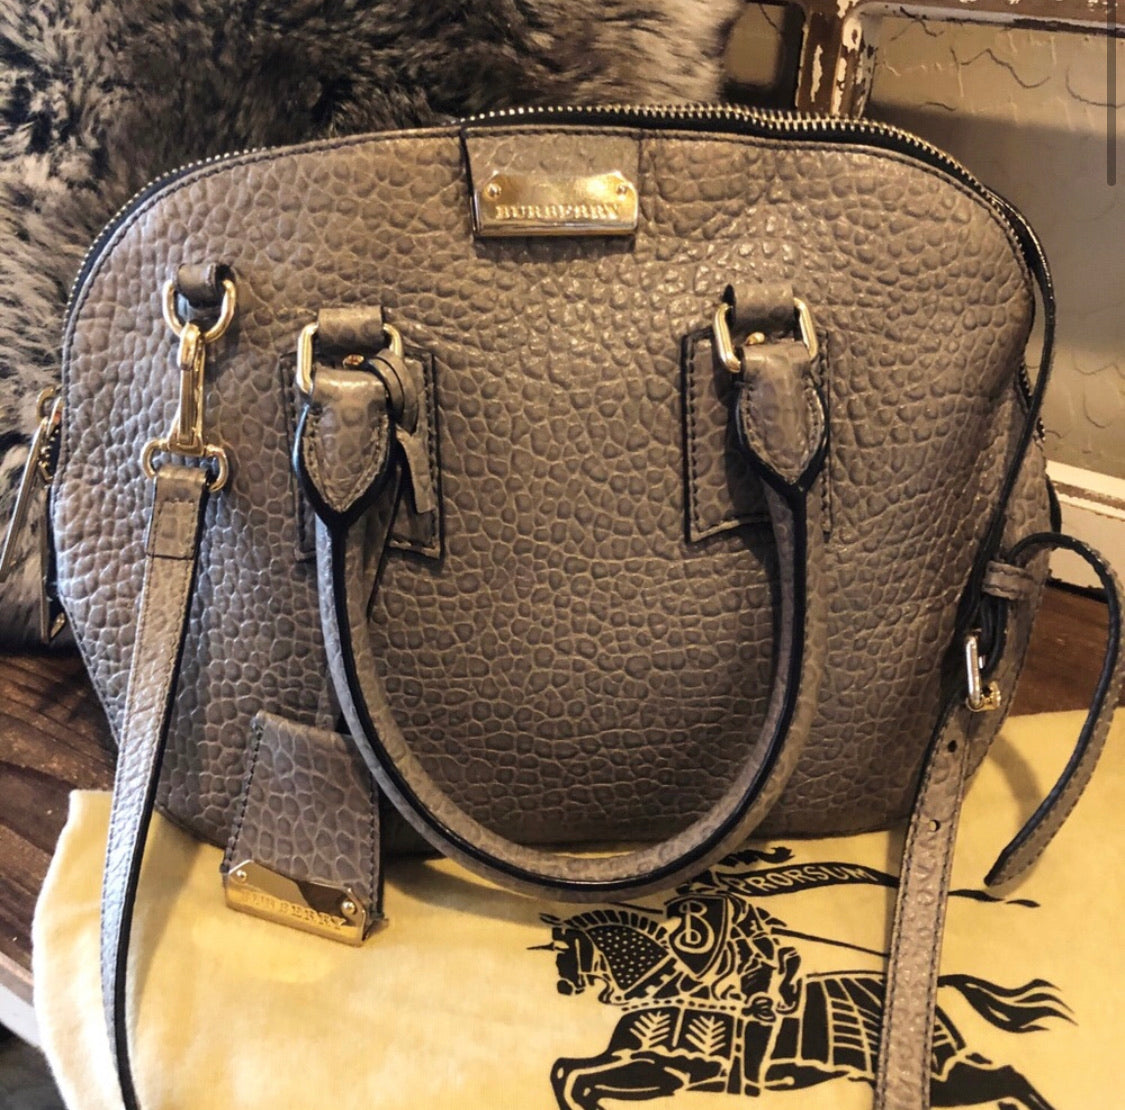 Burberry Orchard Pebbled Leather Heritage Bag